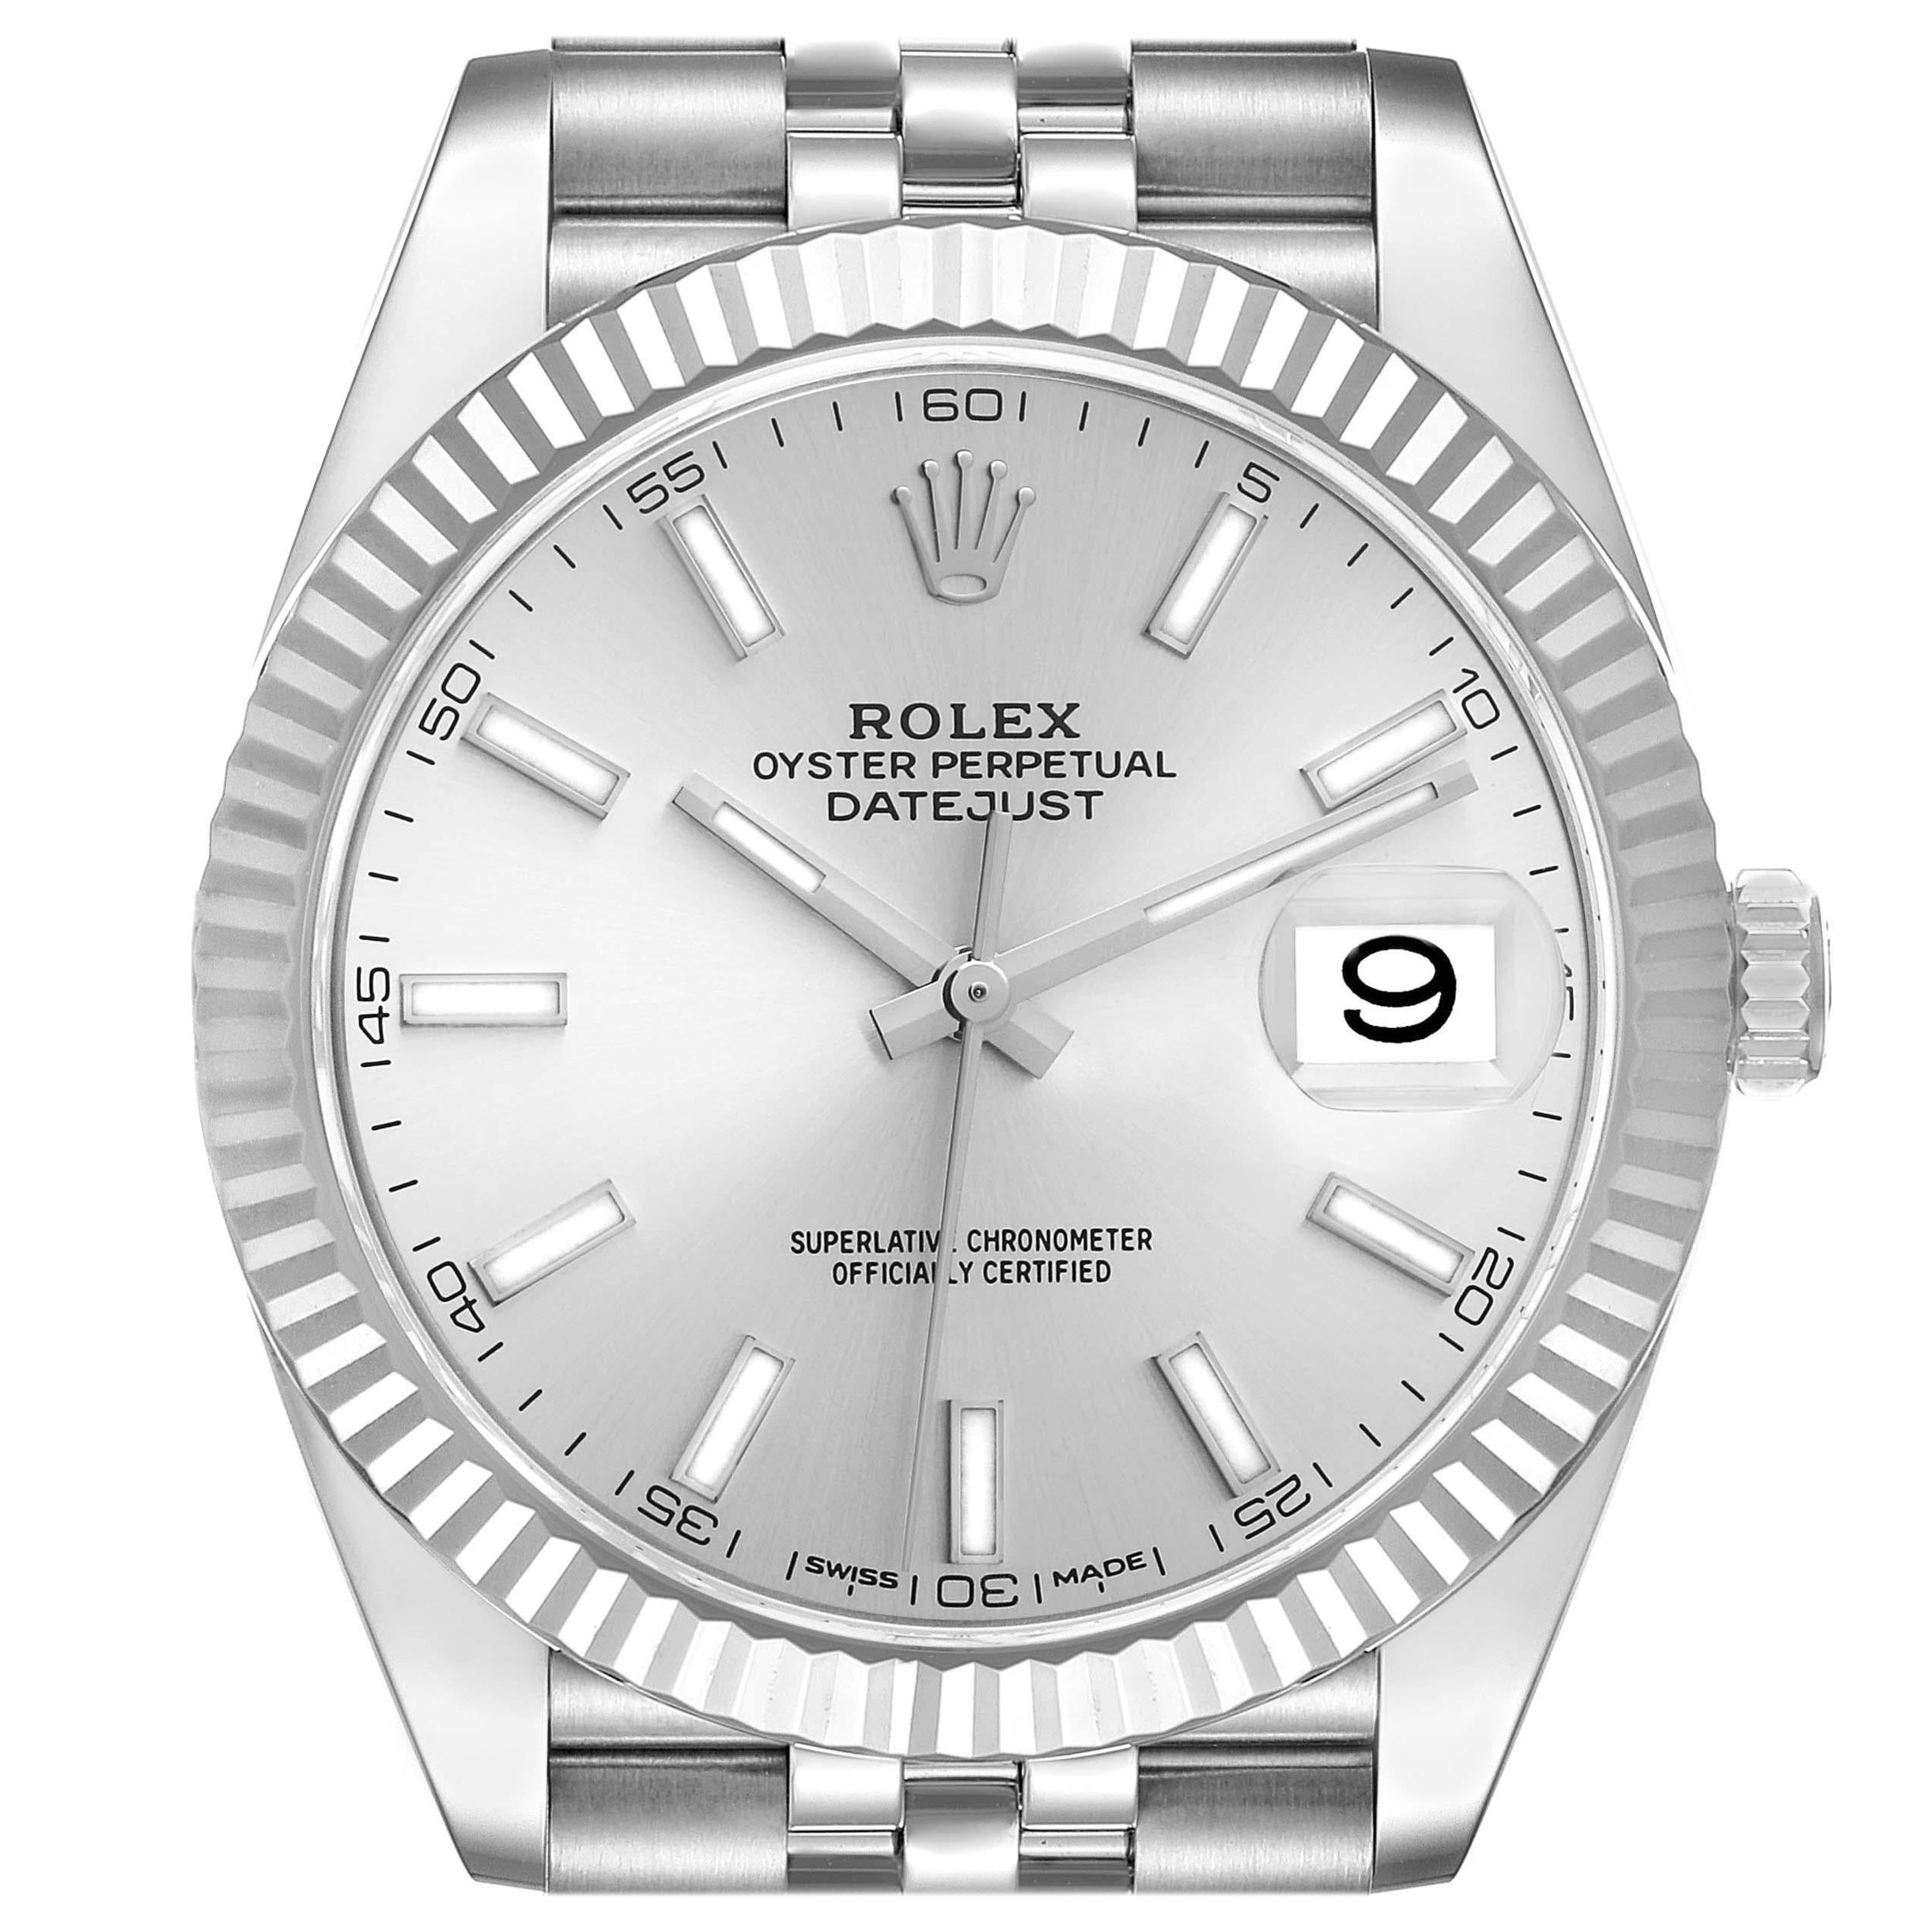 Rolex Datejust 41 Steel White Gold Silver Dial Mens Watch 126334